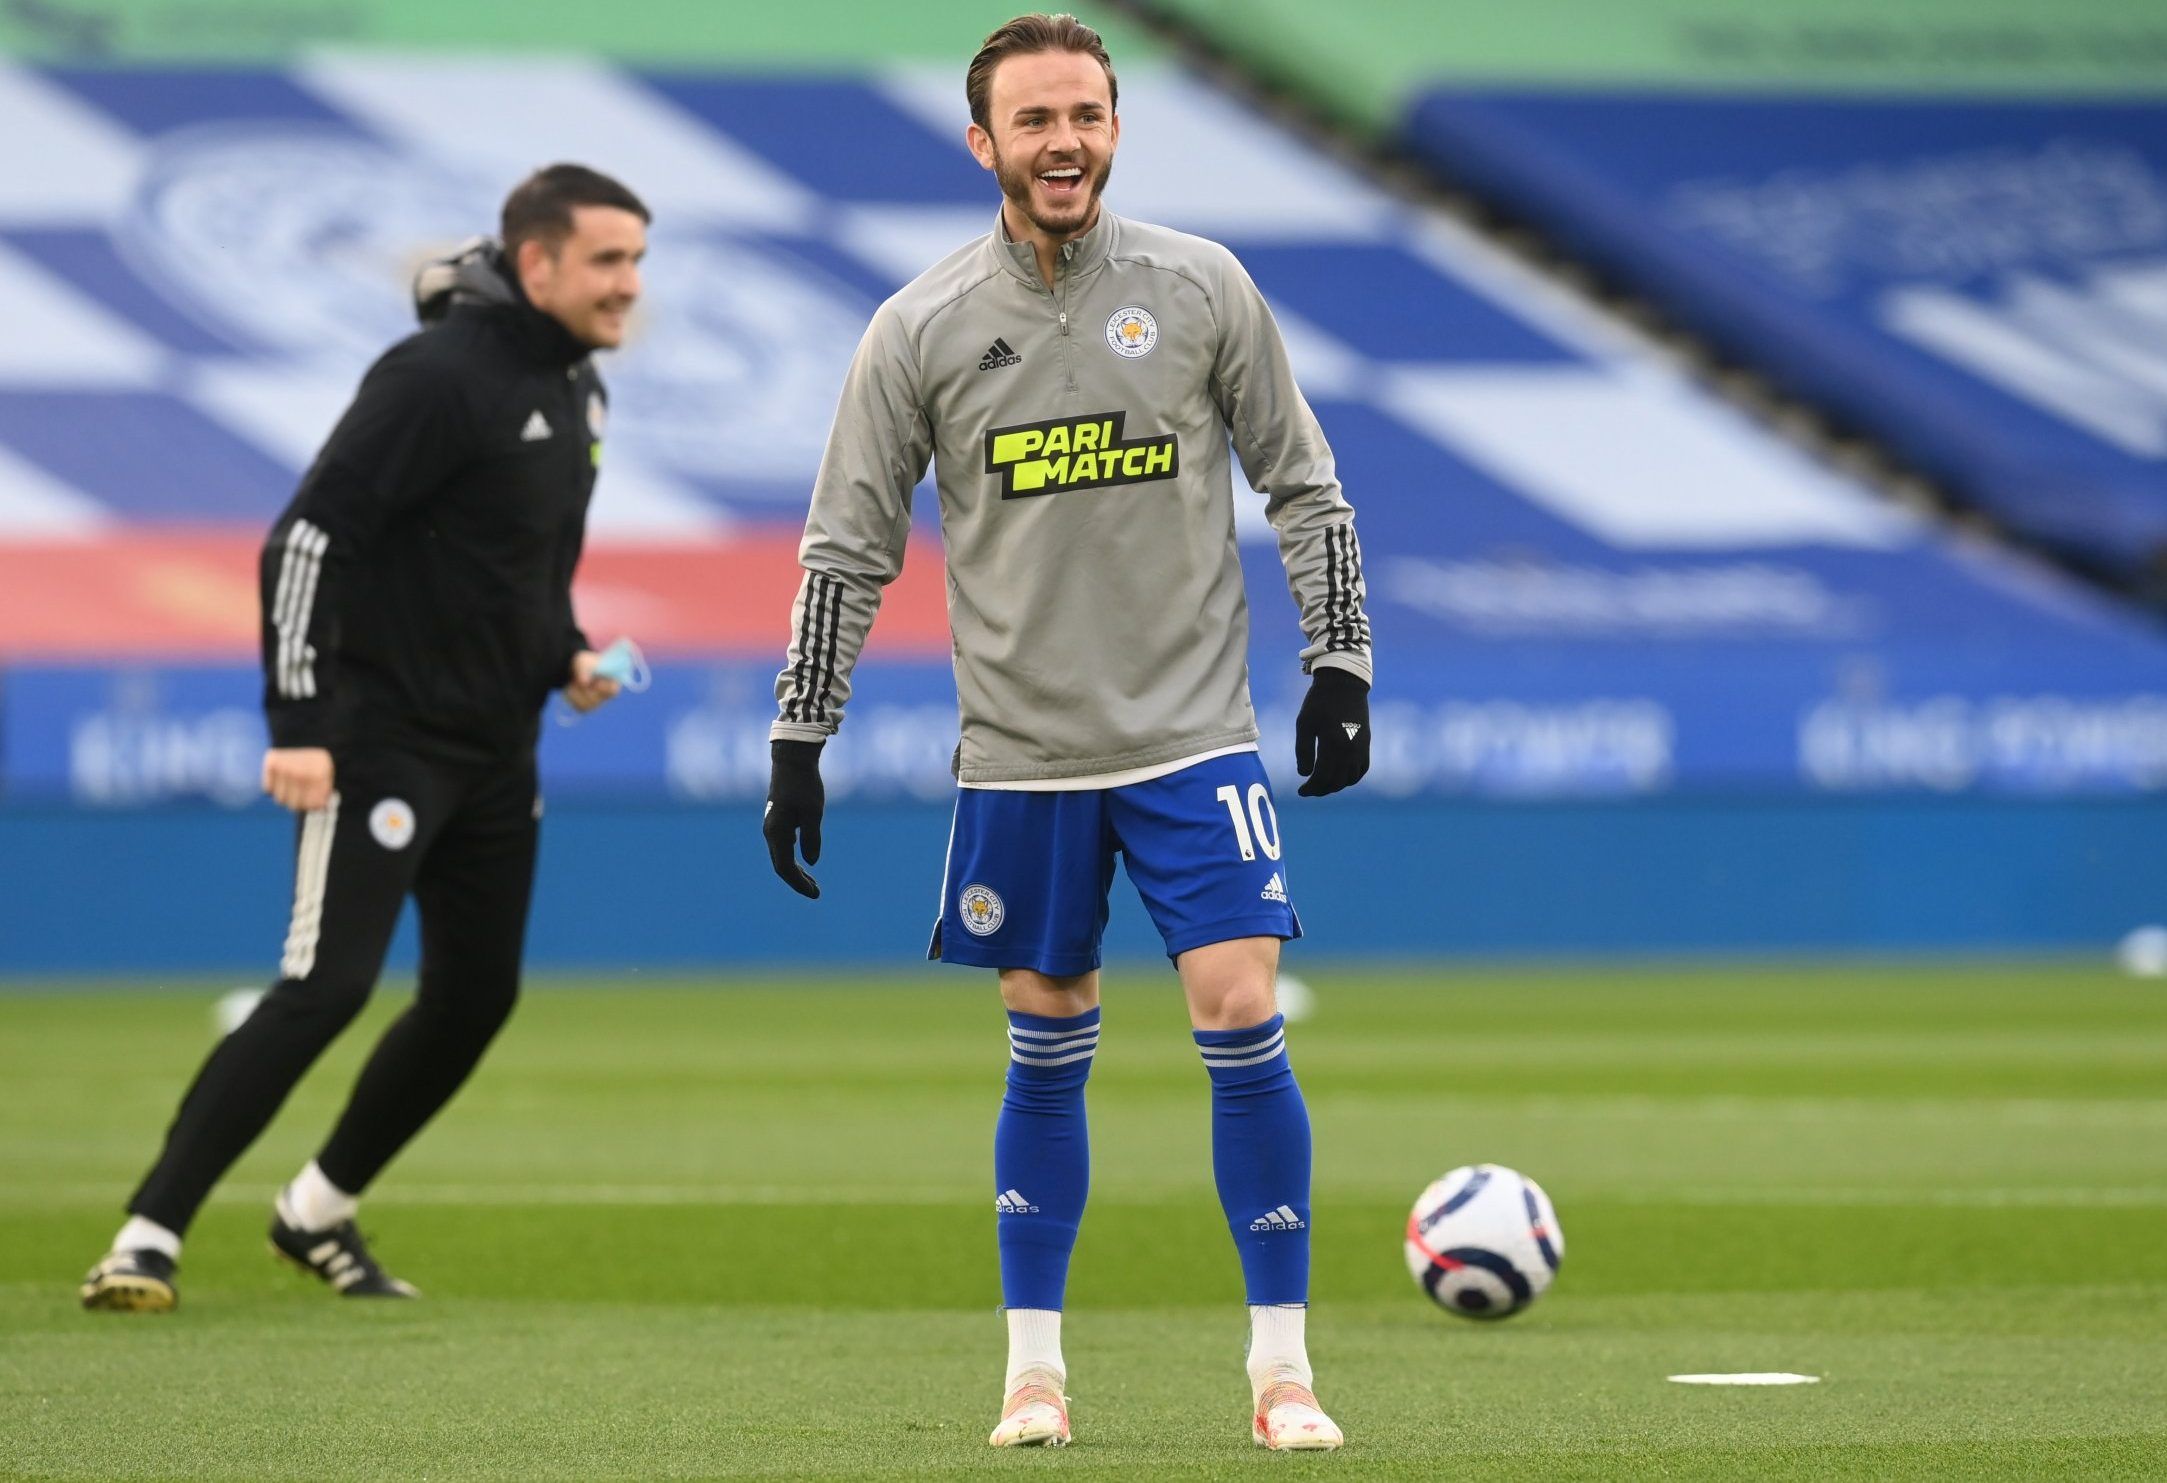 leicester city midfielder james maddison during warm up arsenal transfer target premier league